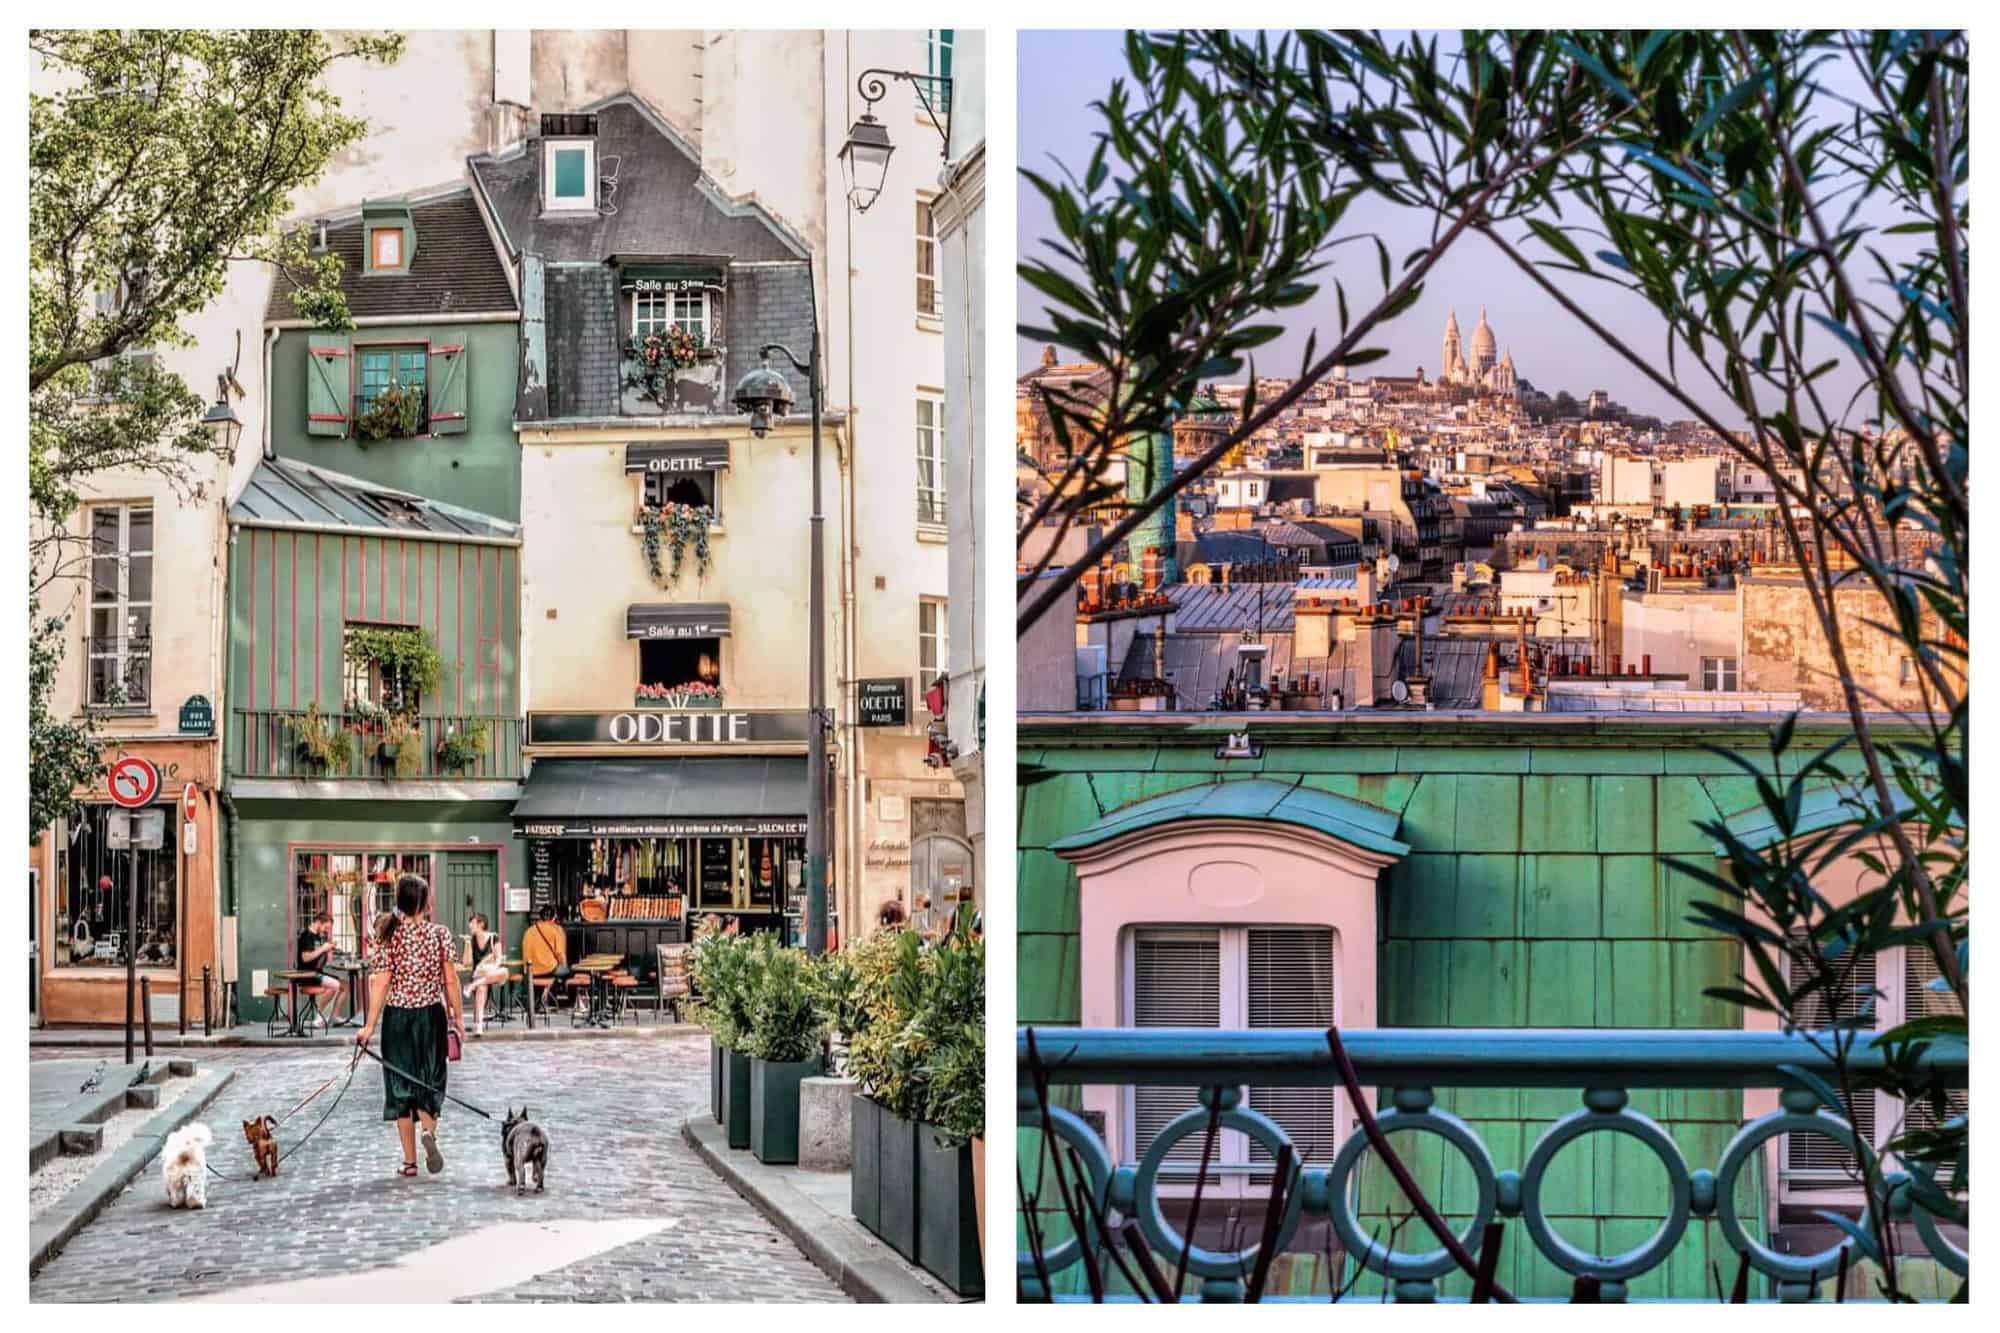 left: a woman walking 2 dogs. Ahead of her, we can see the shop front of Odette in the Latin Quartier, Paris. Right: a view of a Parisian rooftop which is teal green in color. In the horison, the Sacre Coeur clearly appears afains the blue skies of Paris